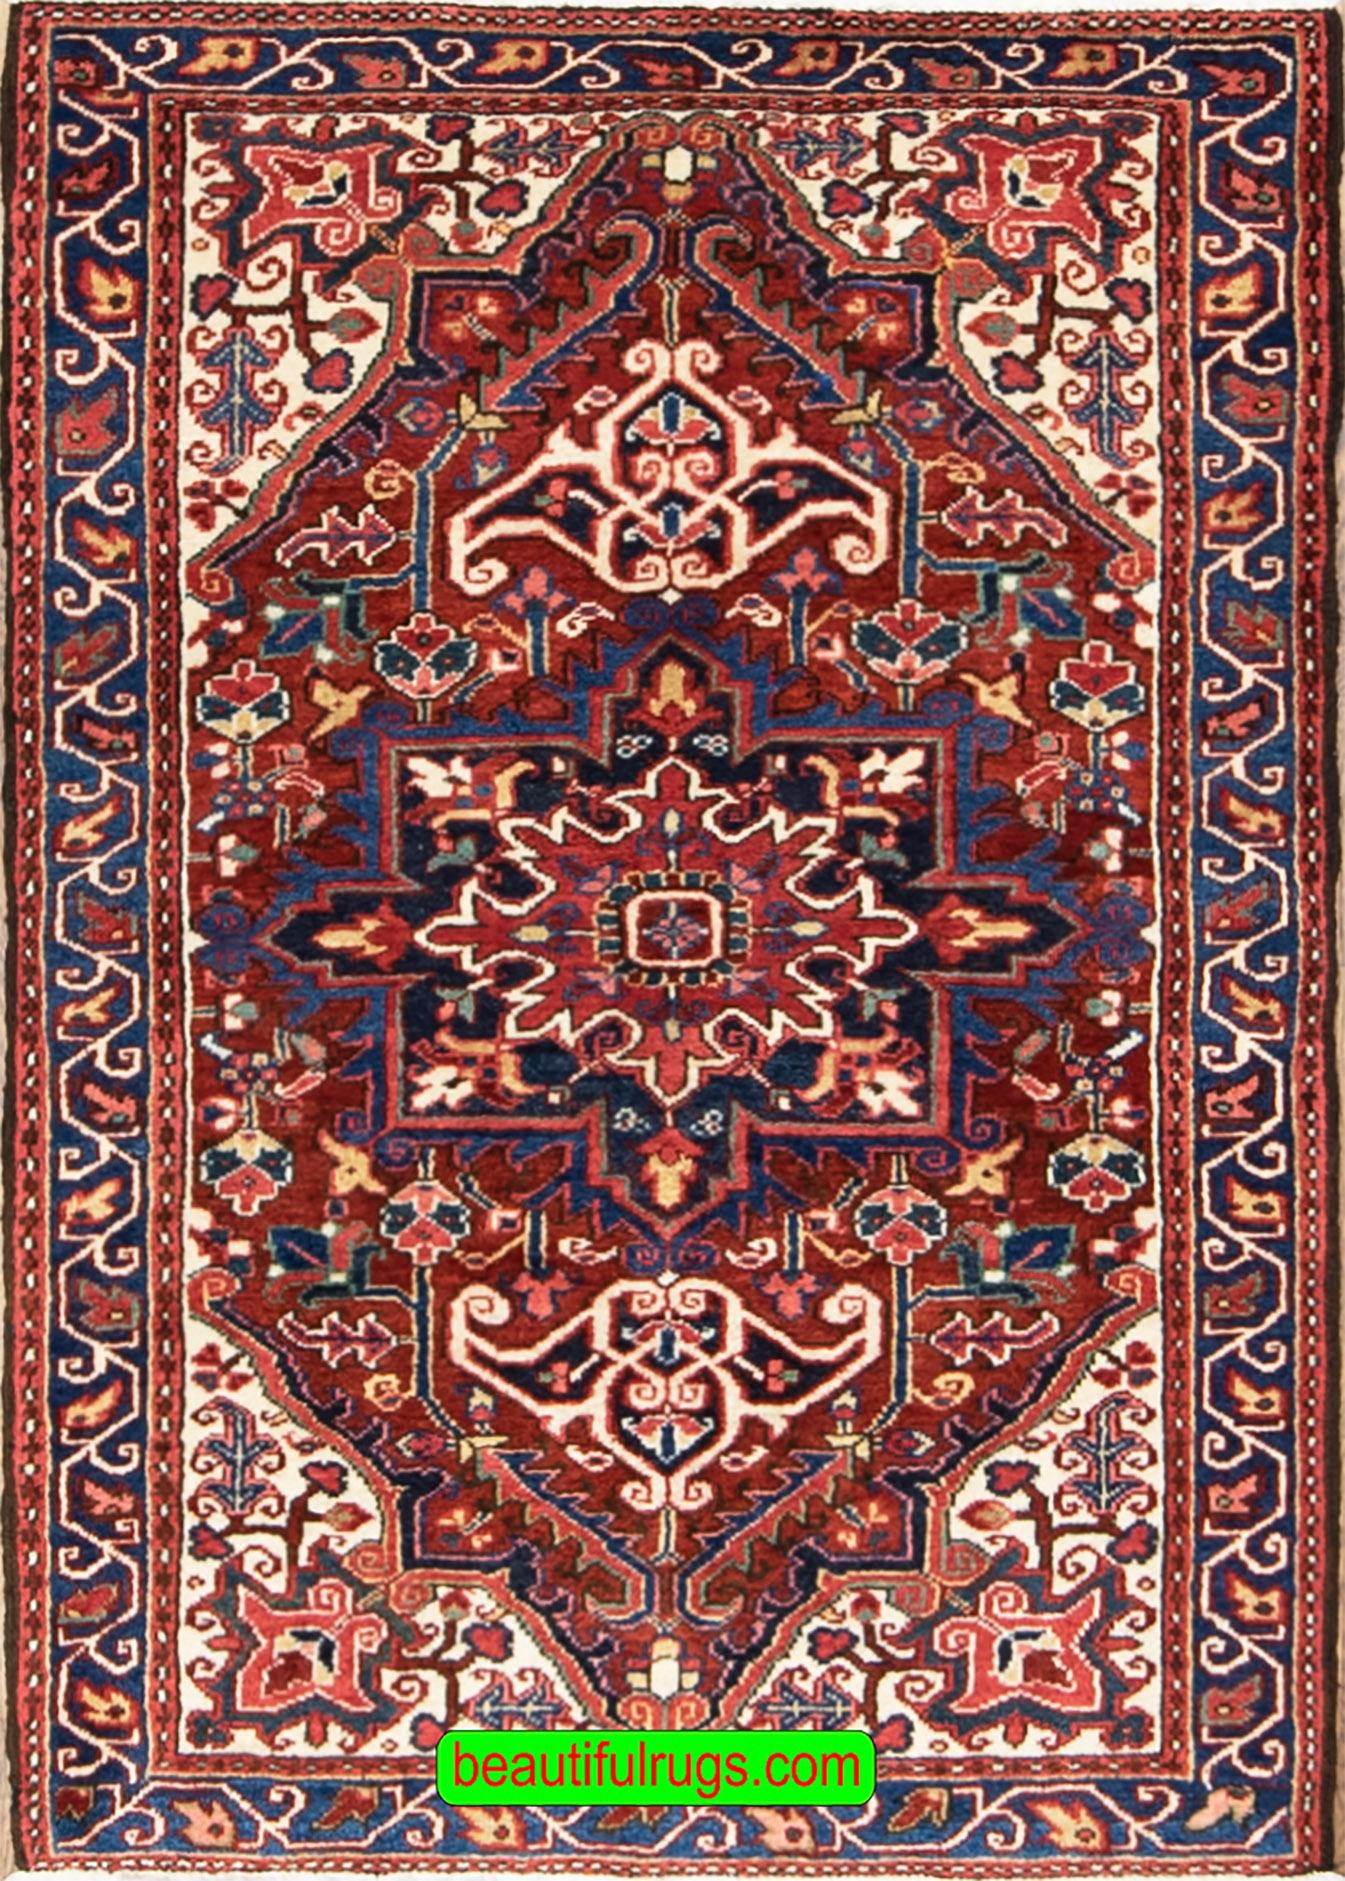 Small Persian Heriz geometric rug in red color. Size 3.2x5.